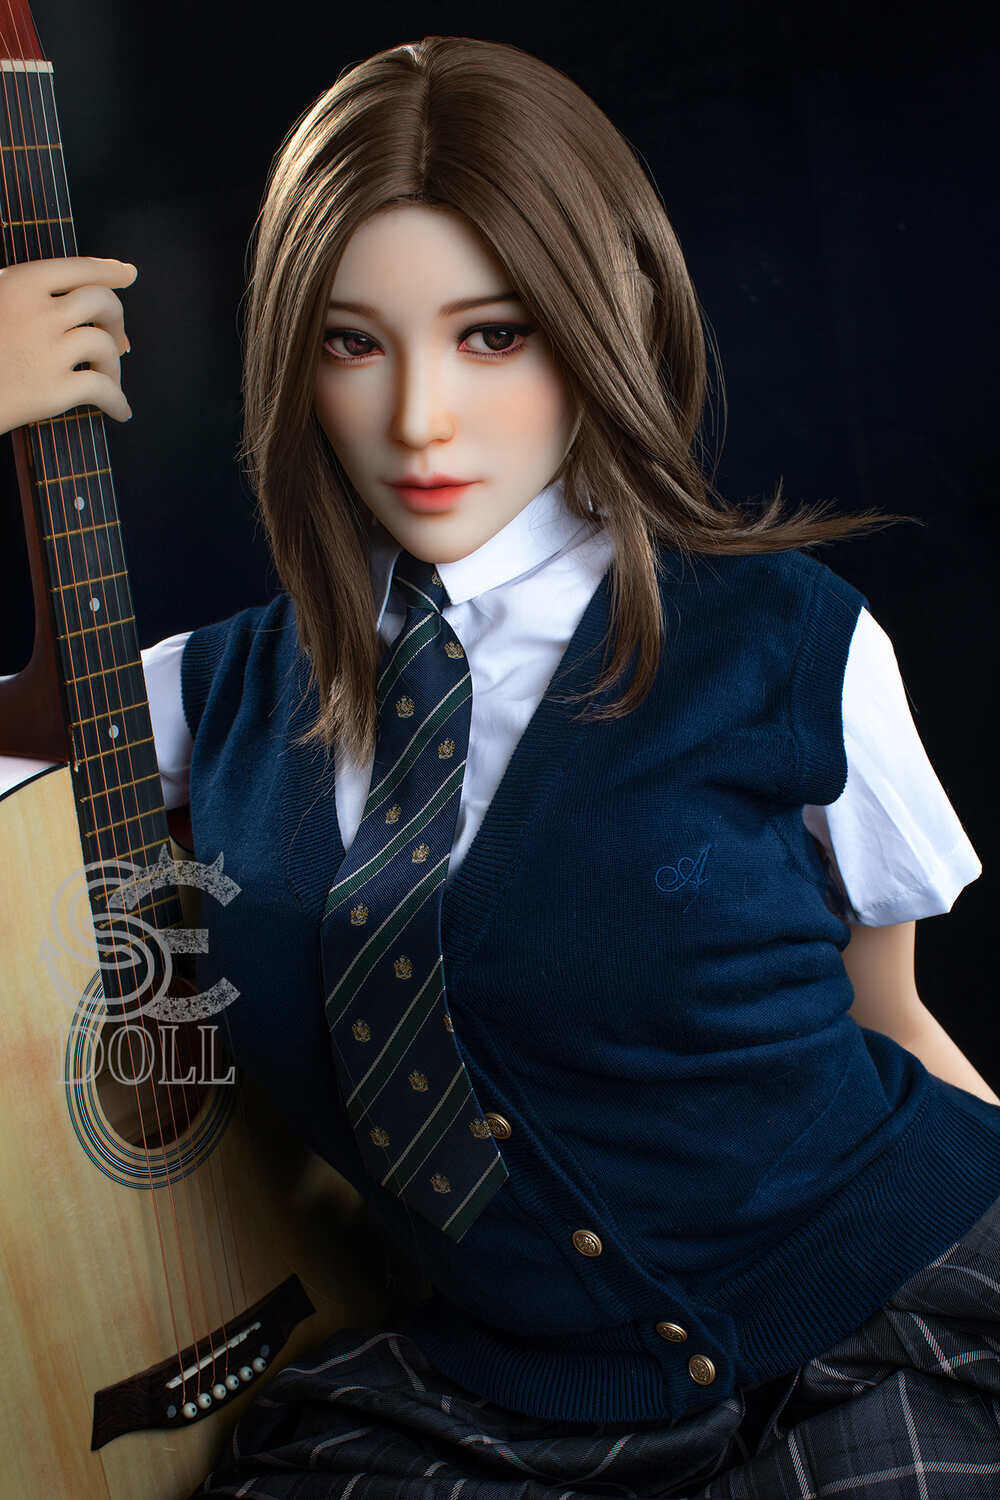 Adriana-163cm(5ft4) SE Adult Doll E-Cup Normal Skin Tone Big Boobs TPE Dolls image1